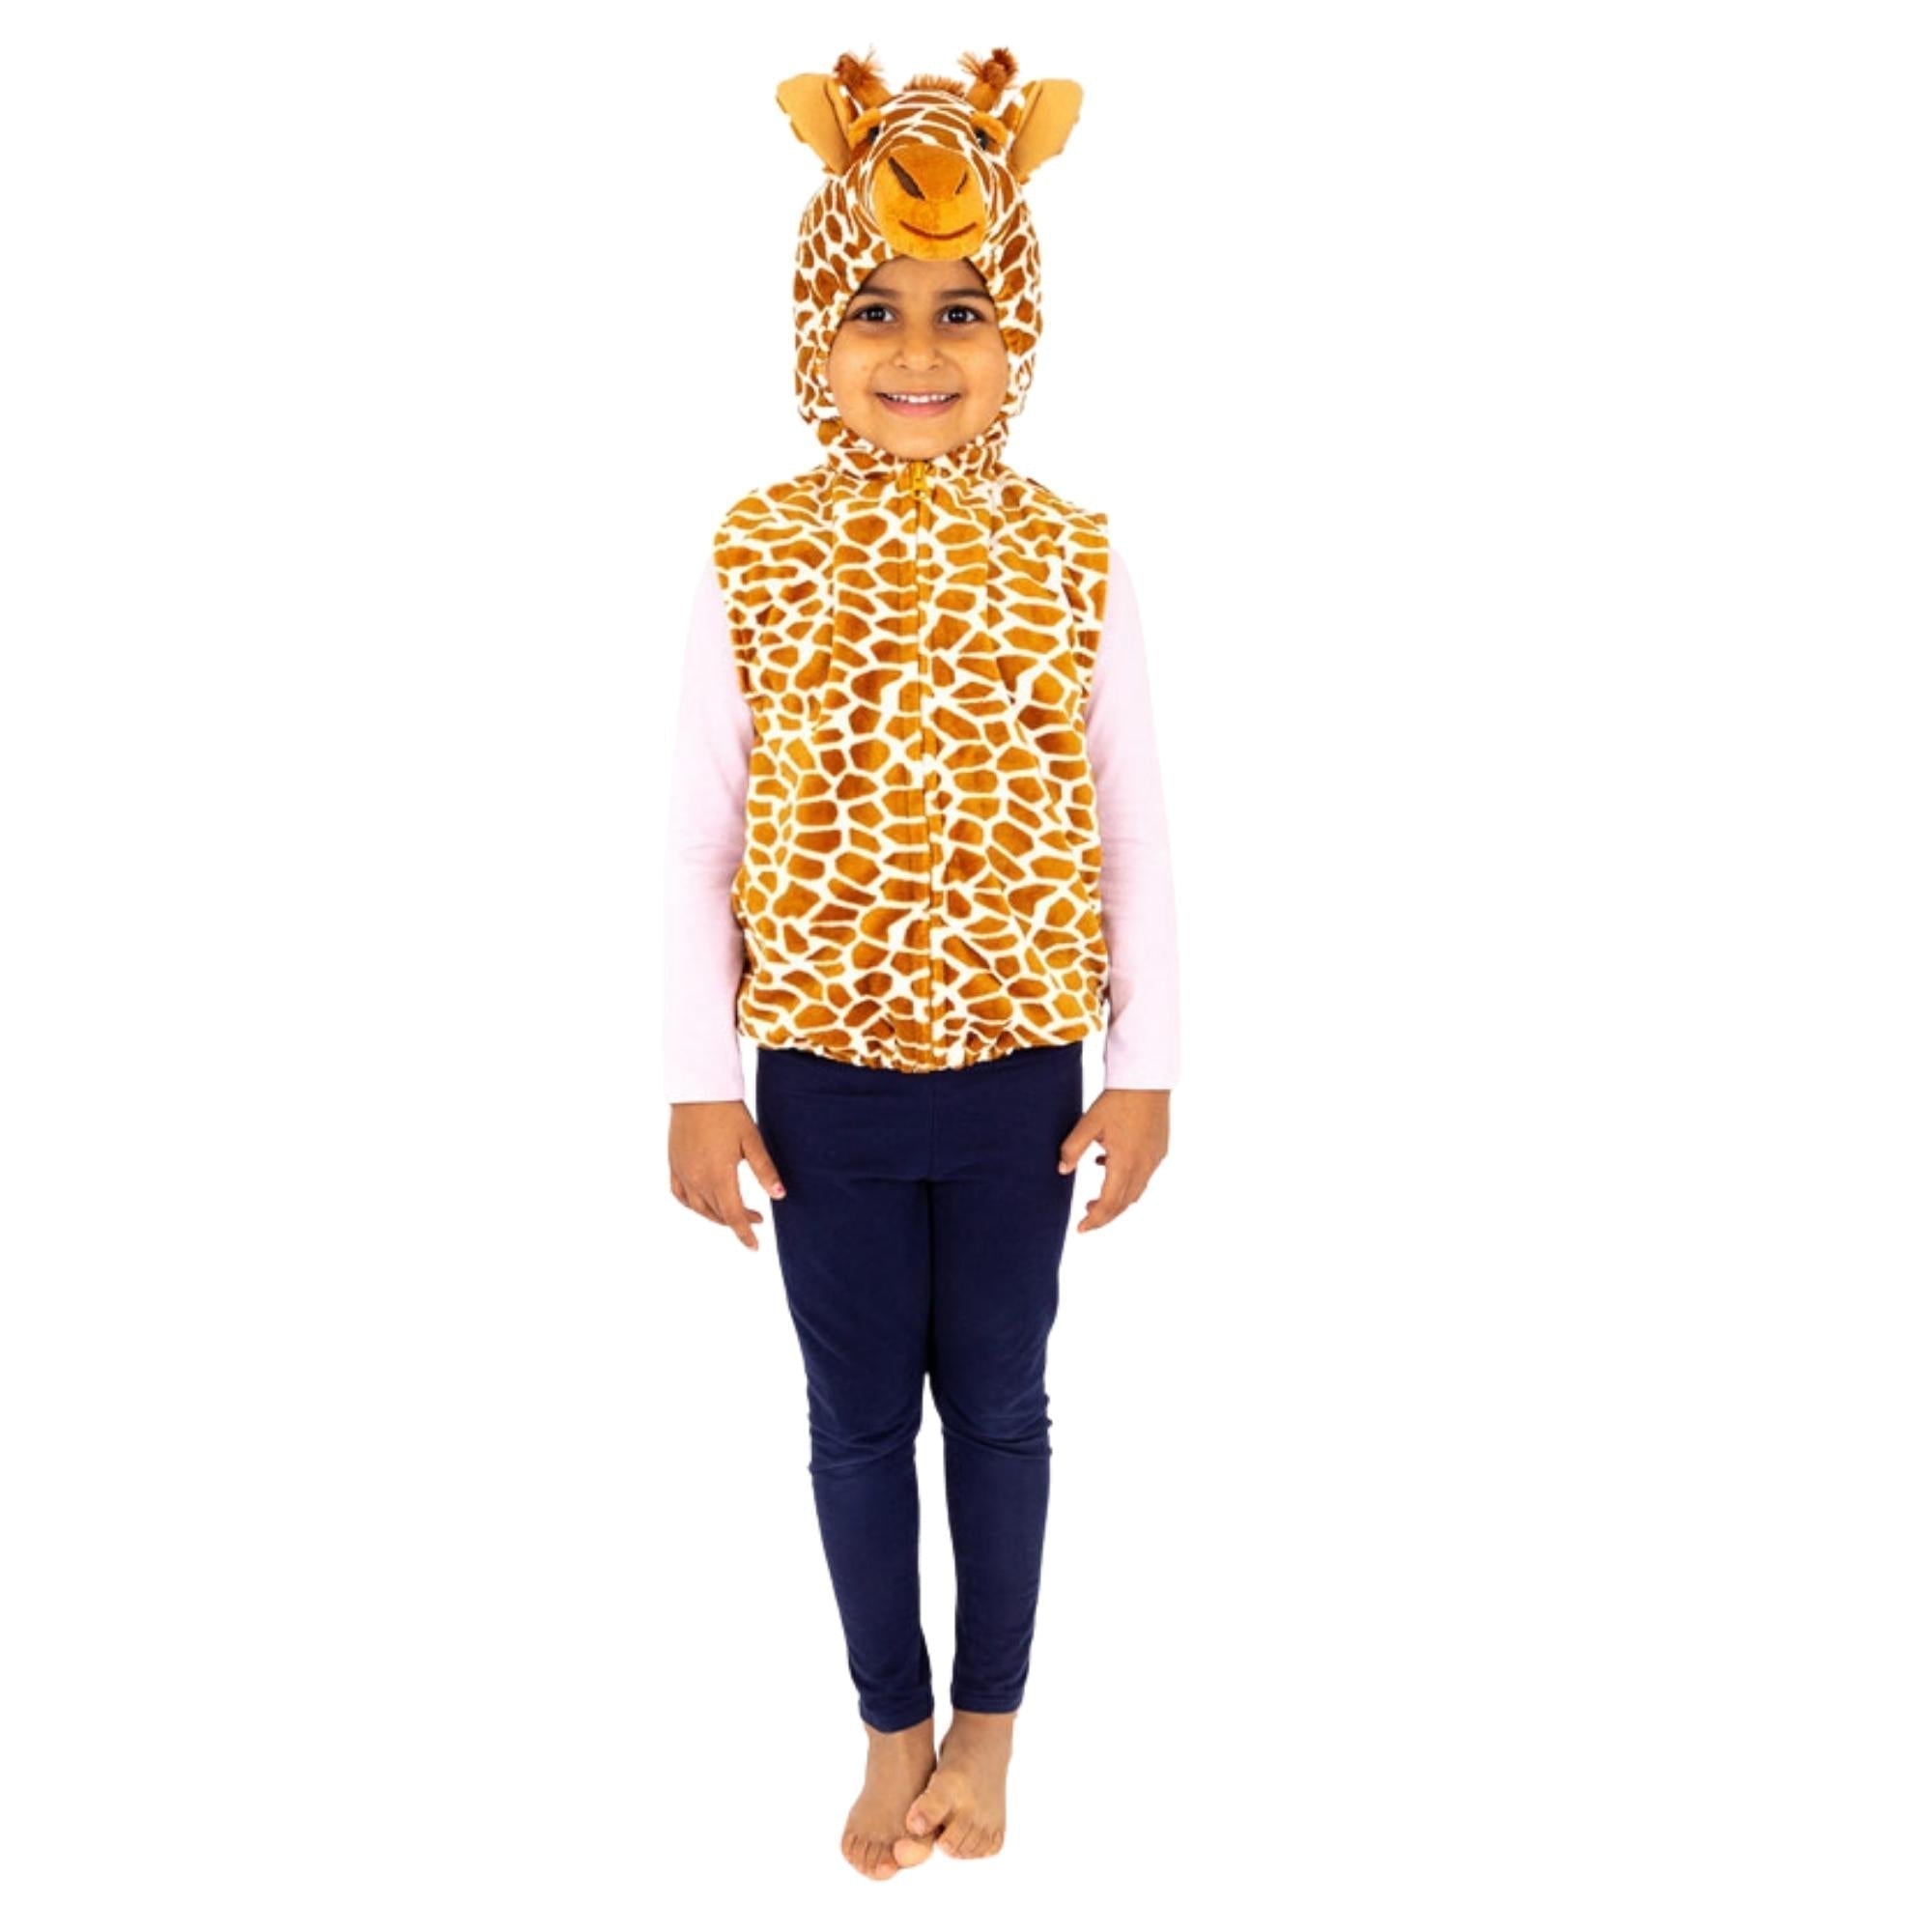 Giraffe Zip Top fancy dress, Children will love this Giraffe costume with easy-wear Zip Top design and will have lots of fun enjoying the world of animal role play. This fantastic giraffe fancy zip top from Pretend to Bee is brilliantly detailed and super-soft. Made from a spot printed velour fabric the top is closed by a front zip and it has a velour hood with giraffe head. The giraffe face features a long nose, eyes,, giraffe ossicones (horns) and pointed ears. At the back of the costume there is a tail. 